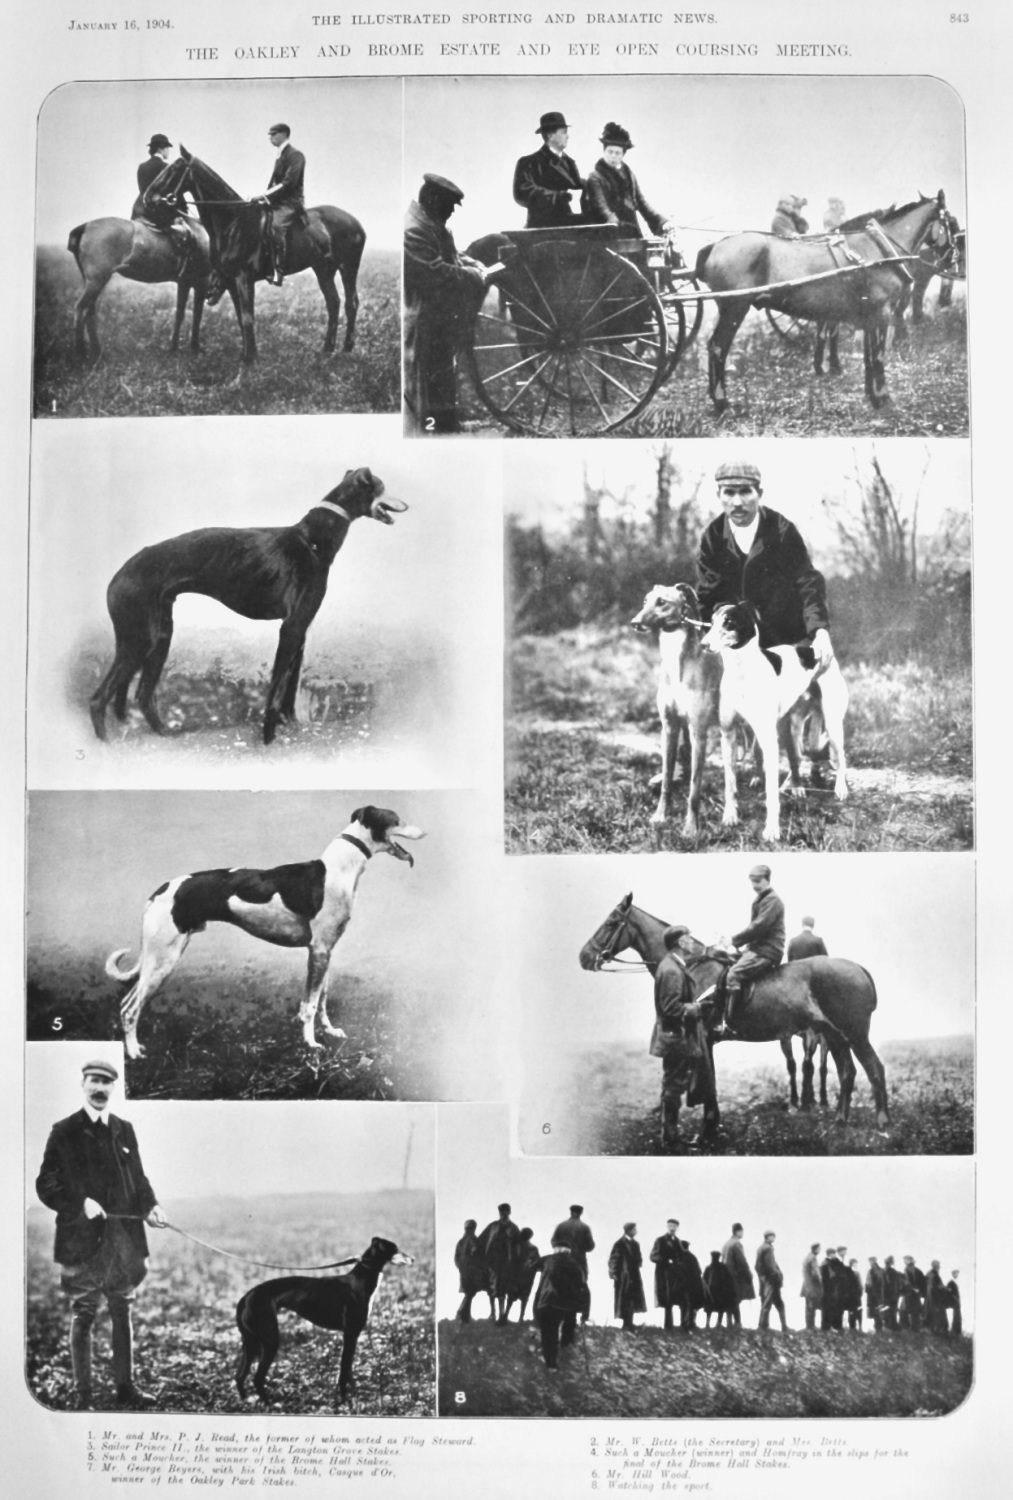 The Oakley and Brome Estate and Eye Open Coursing Meeting.  1904.